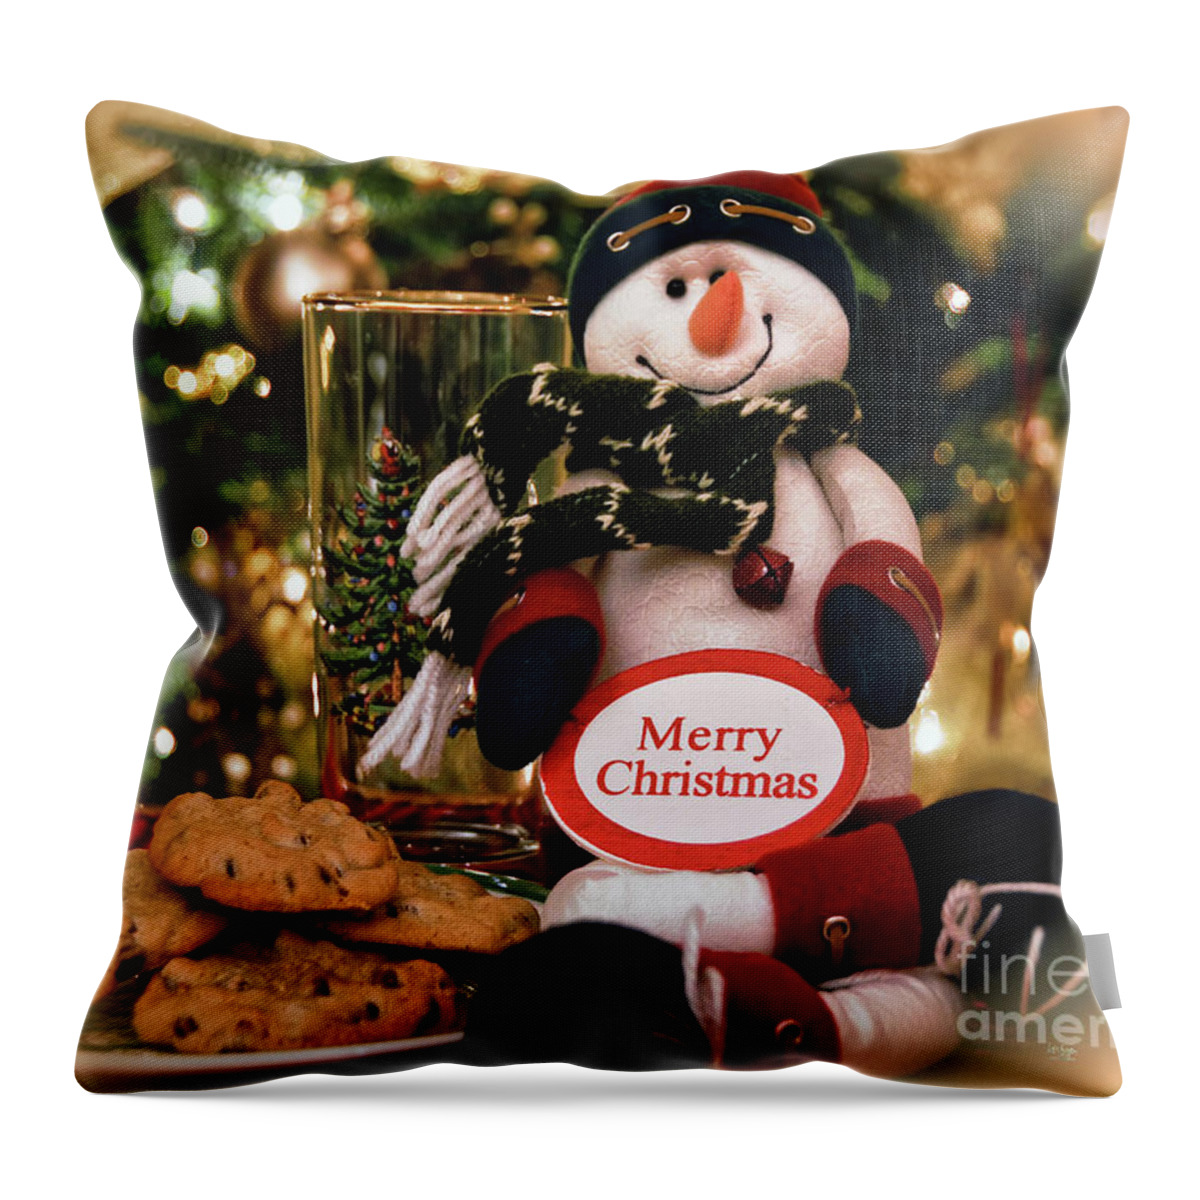 Merry Christmas Throw Pillow featuring the photograph Merry Christmas Snowman by Lois Bryan